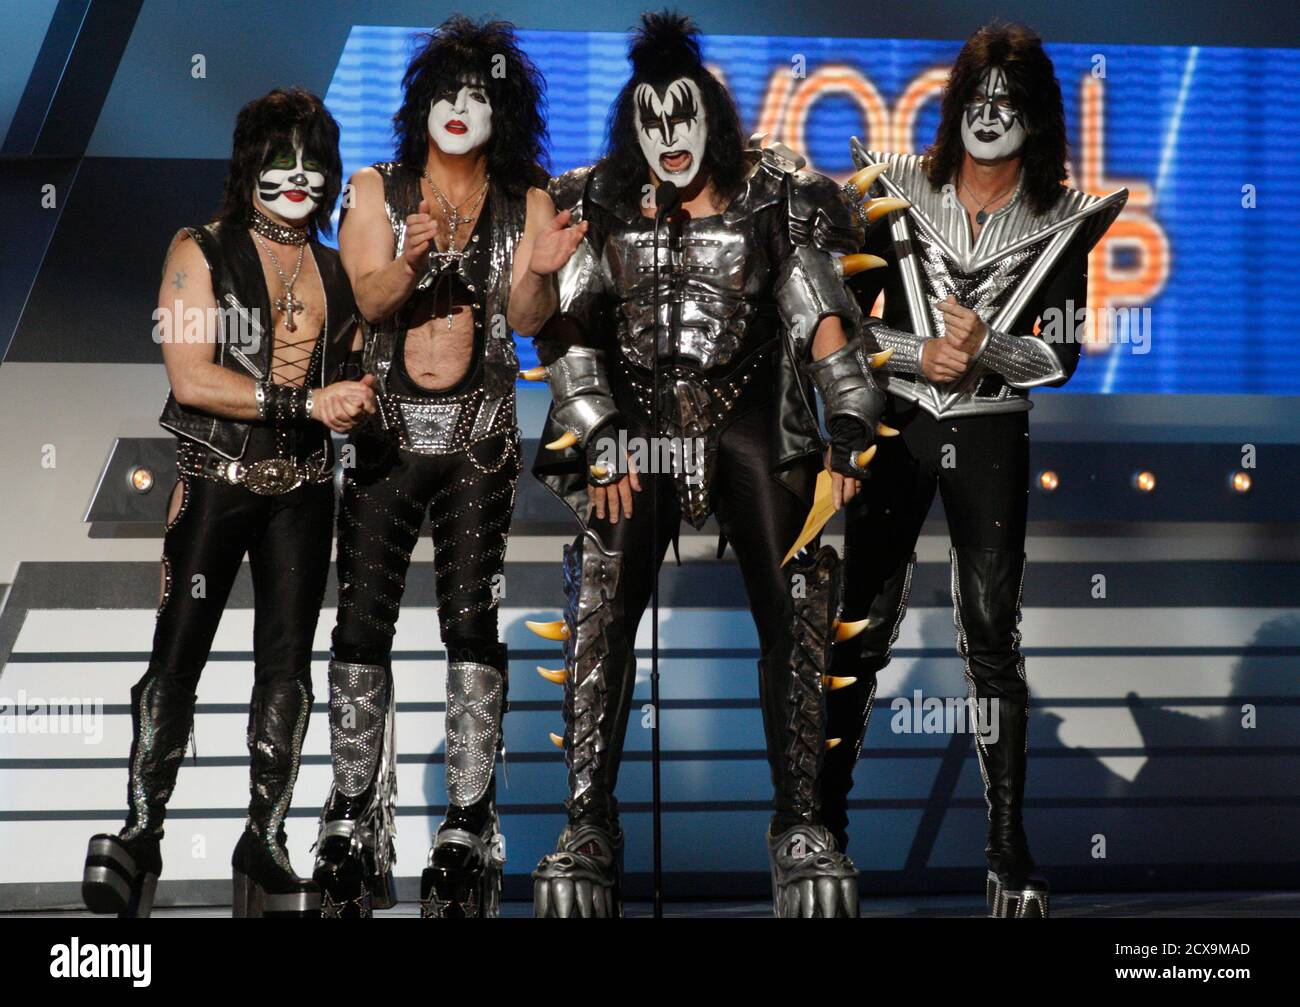 Page 2 - Kiss Band High Resolution Stock Photography and Images - Alamy